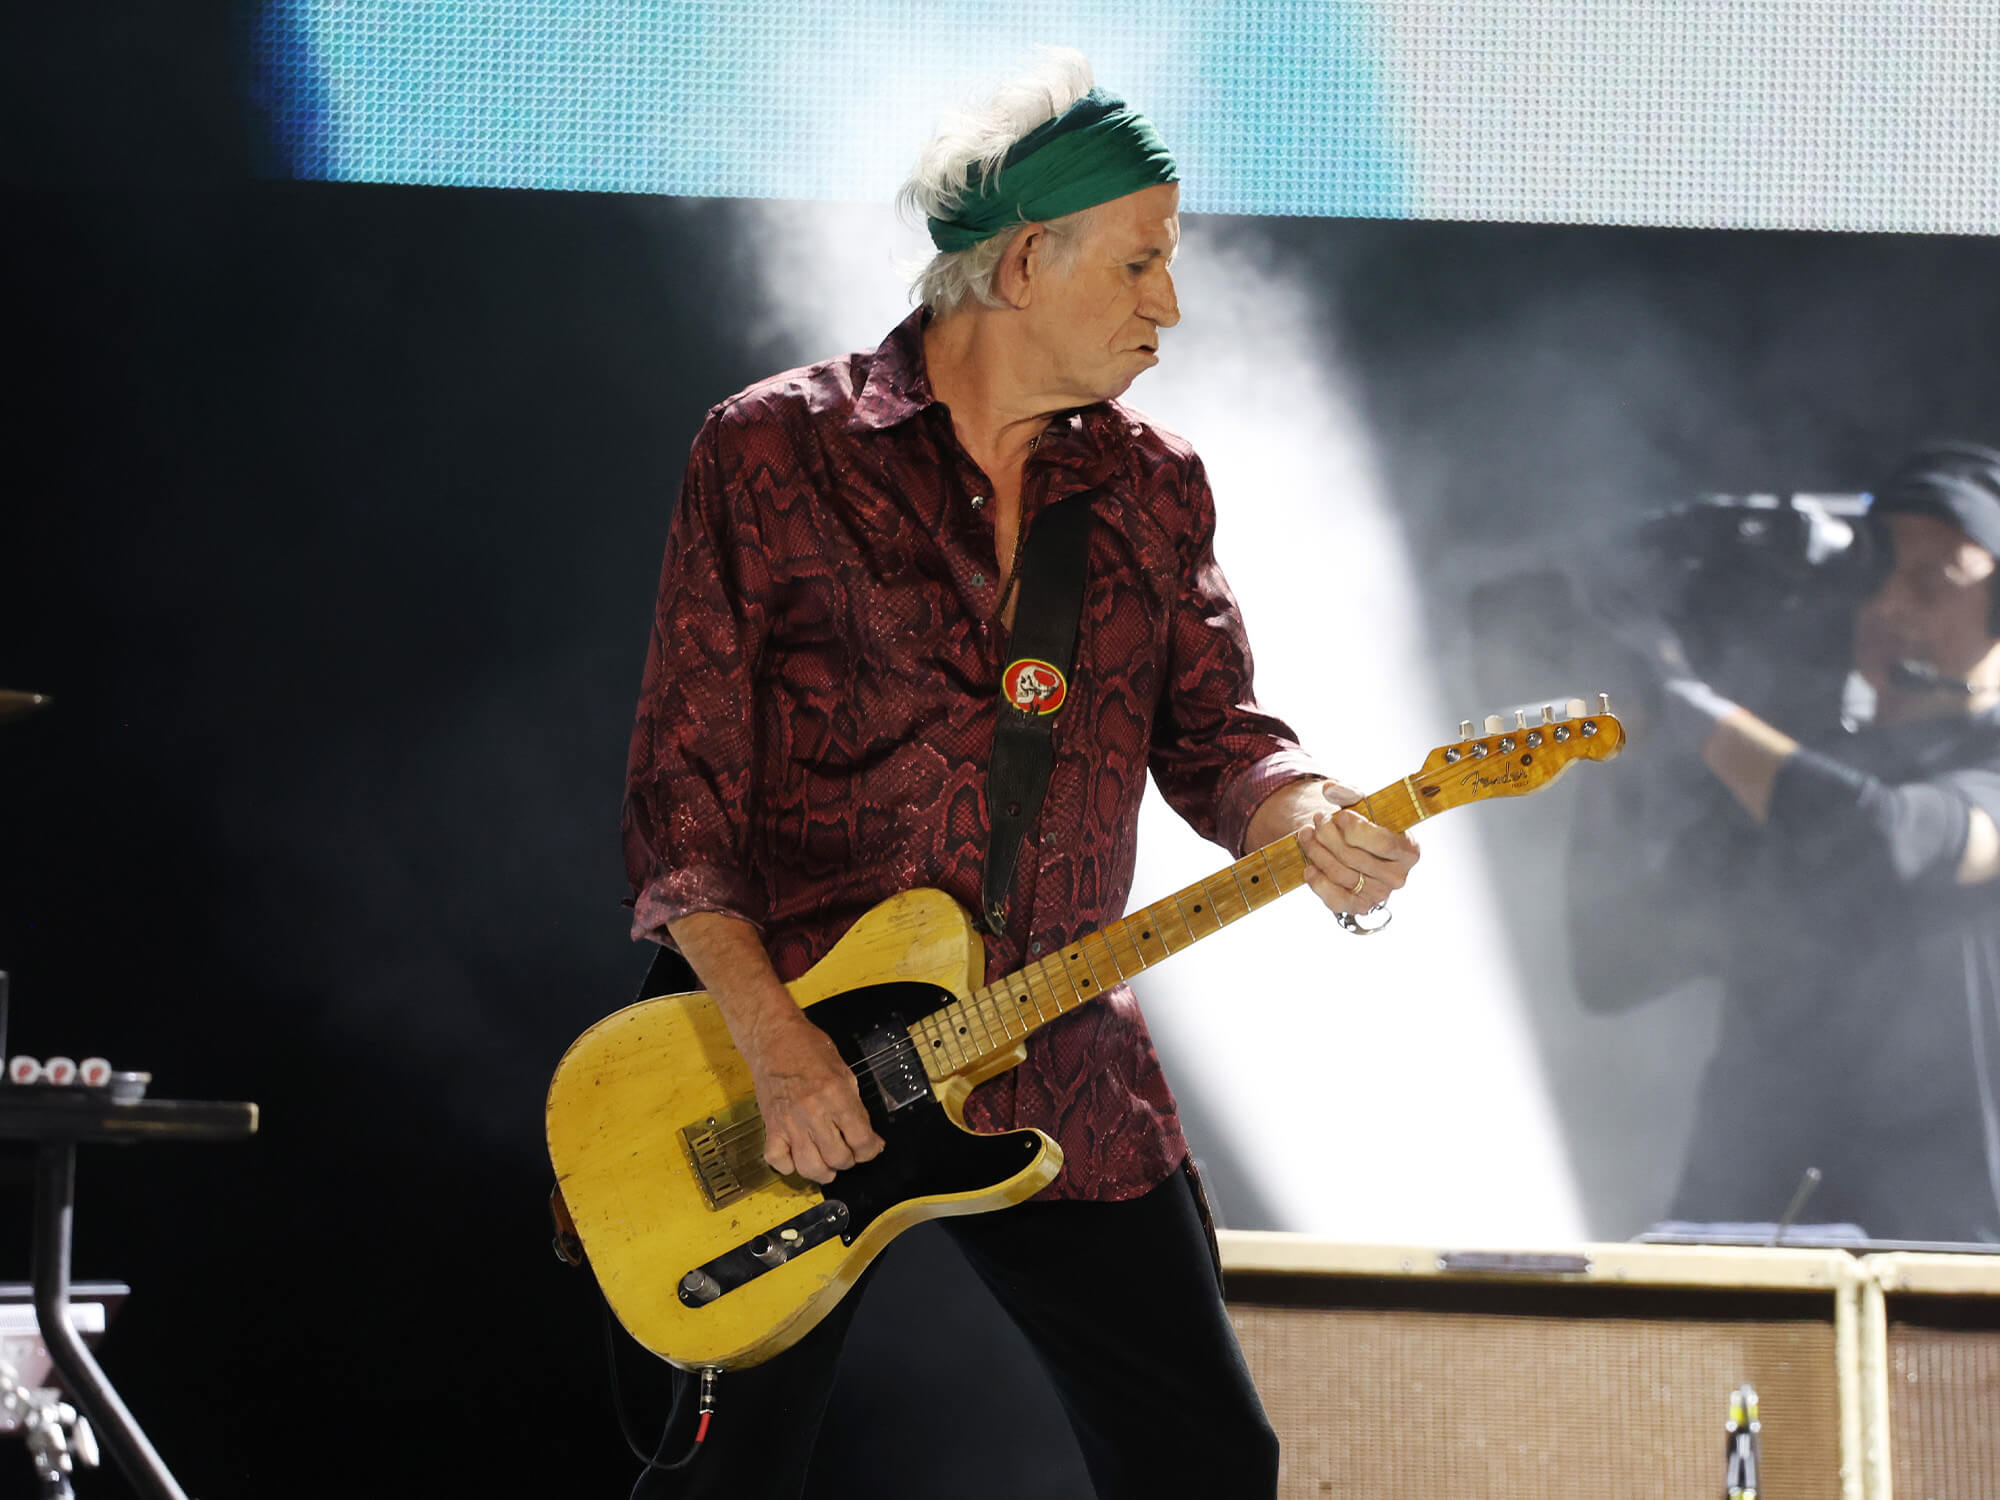 Keith Richards on stage. He has his Telecaster in hand, is wearing a head band and is pulling a pouted, concentrated facial expression.